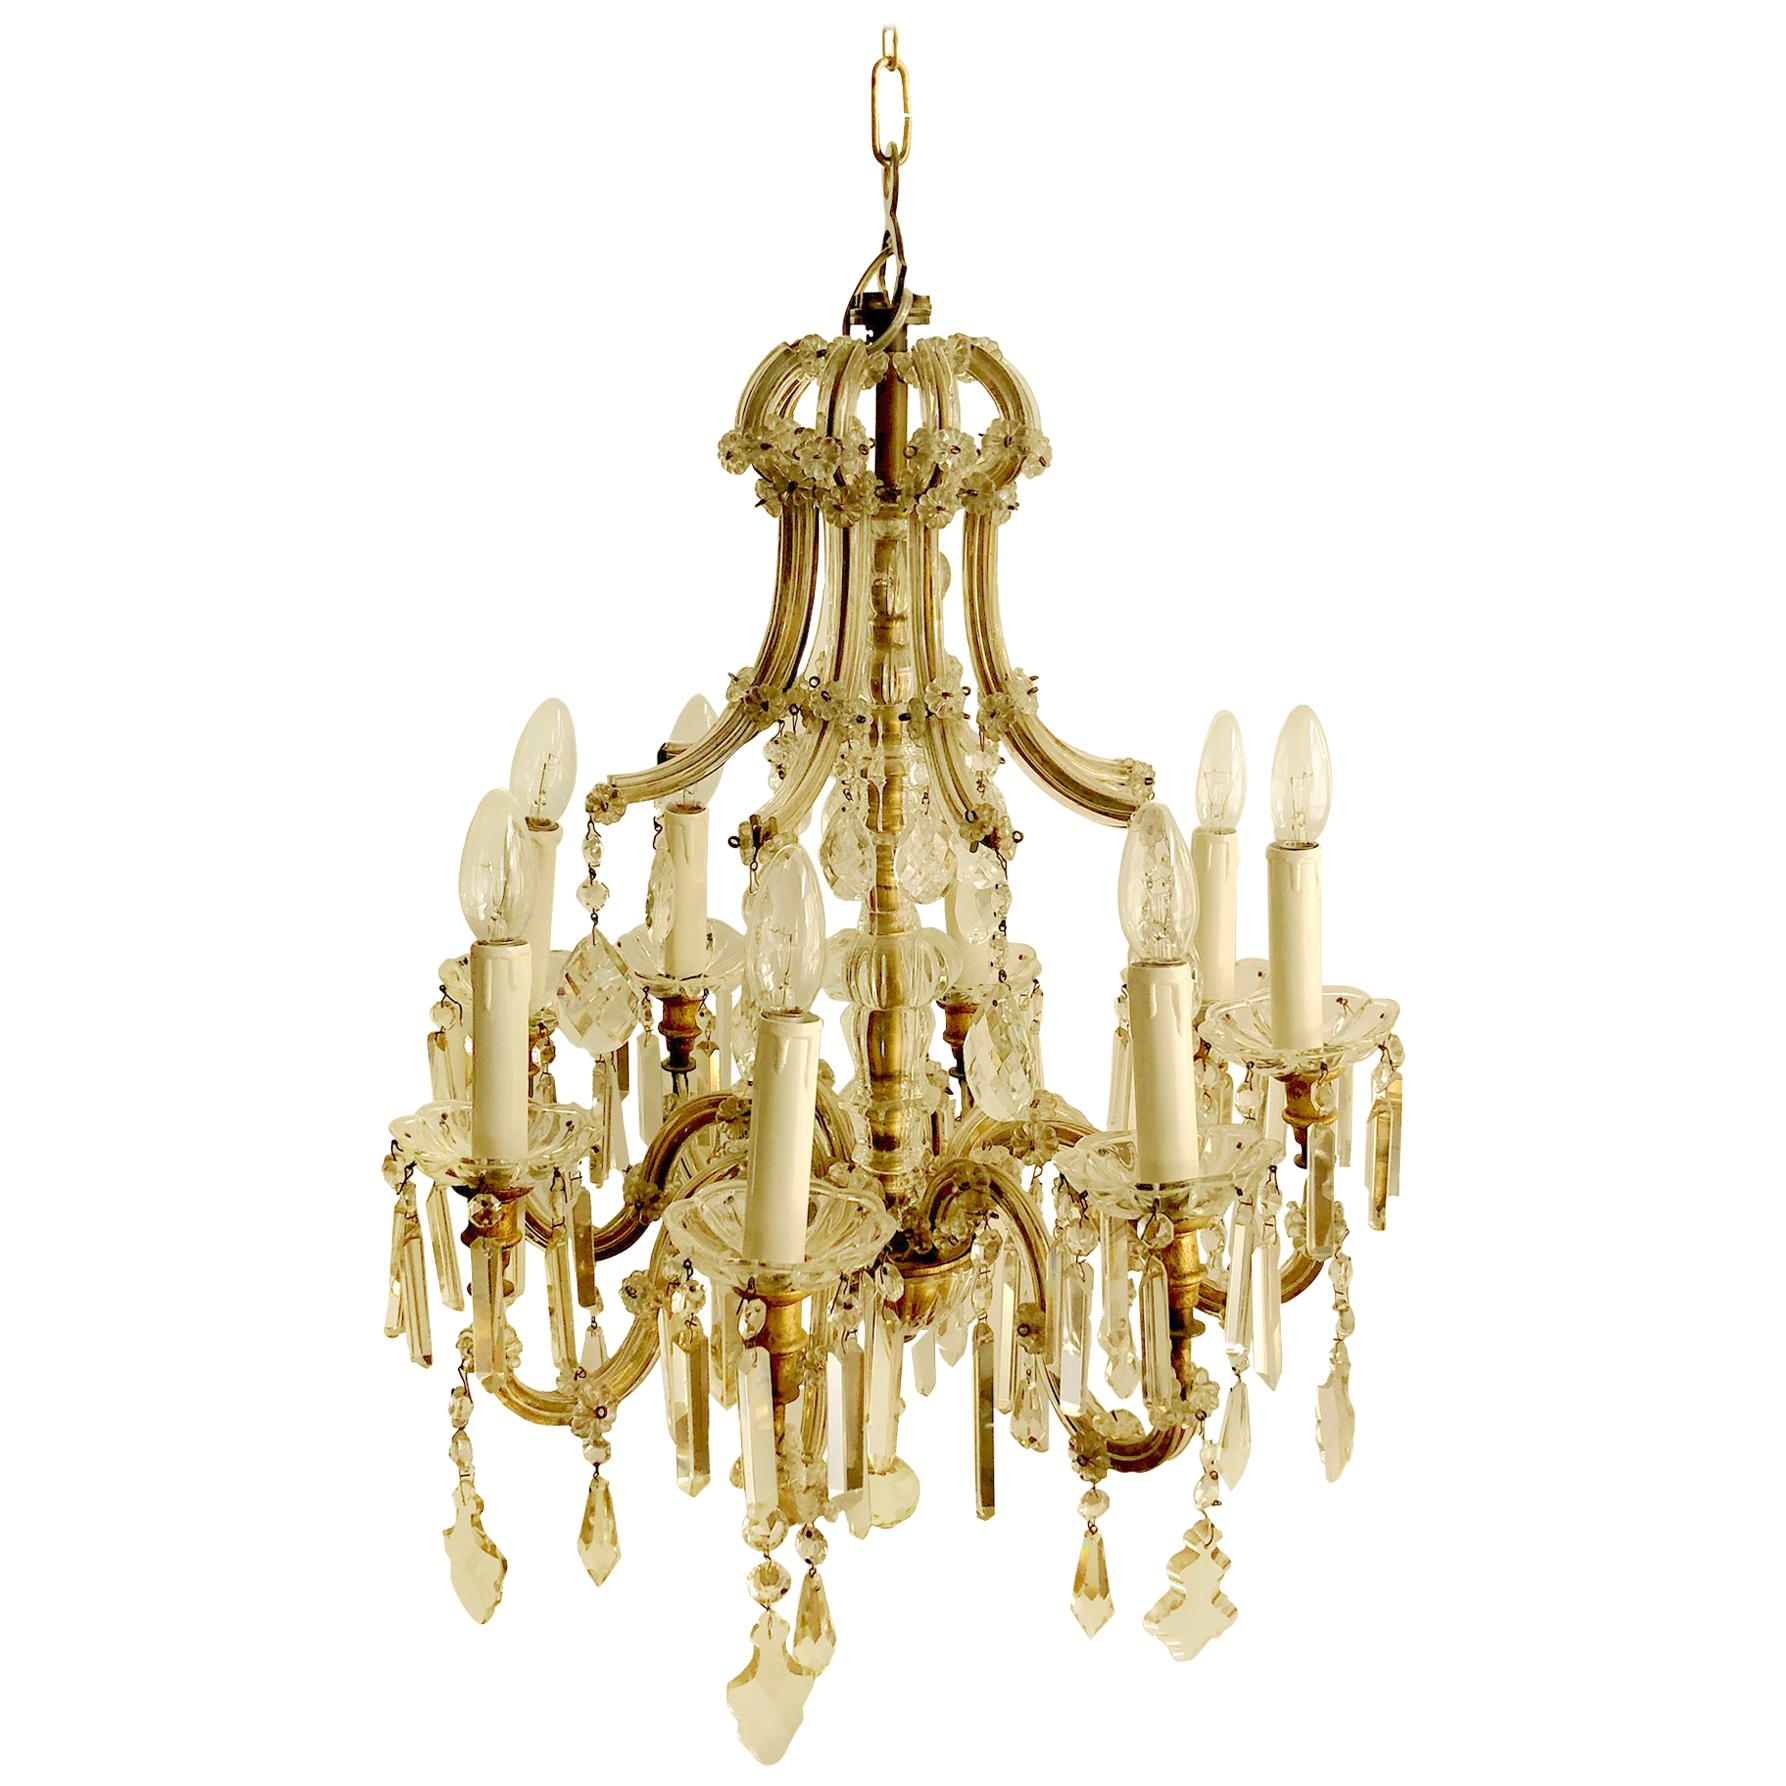 Eight Arm Maria Theresa Crystal Chandelier, Hungary or Austria, 1900s For Sale